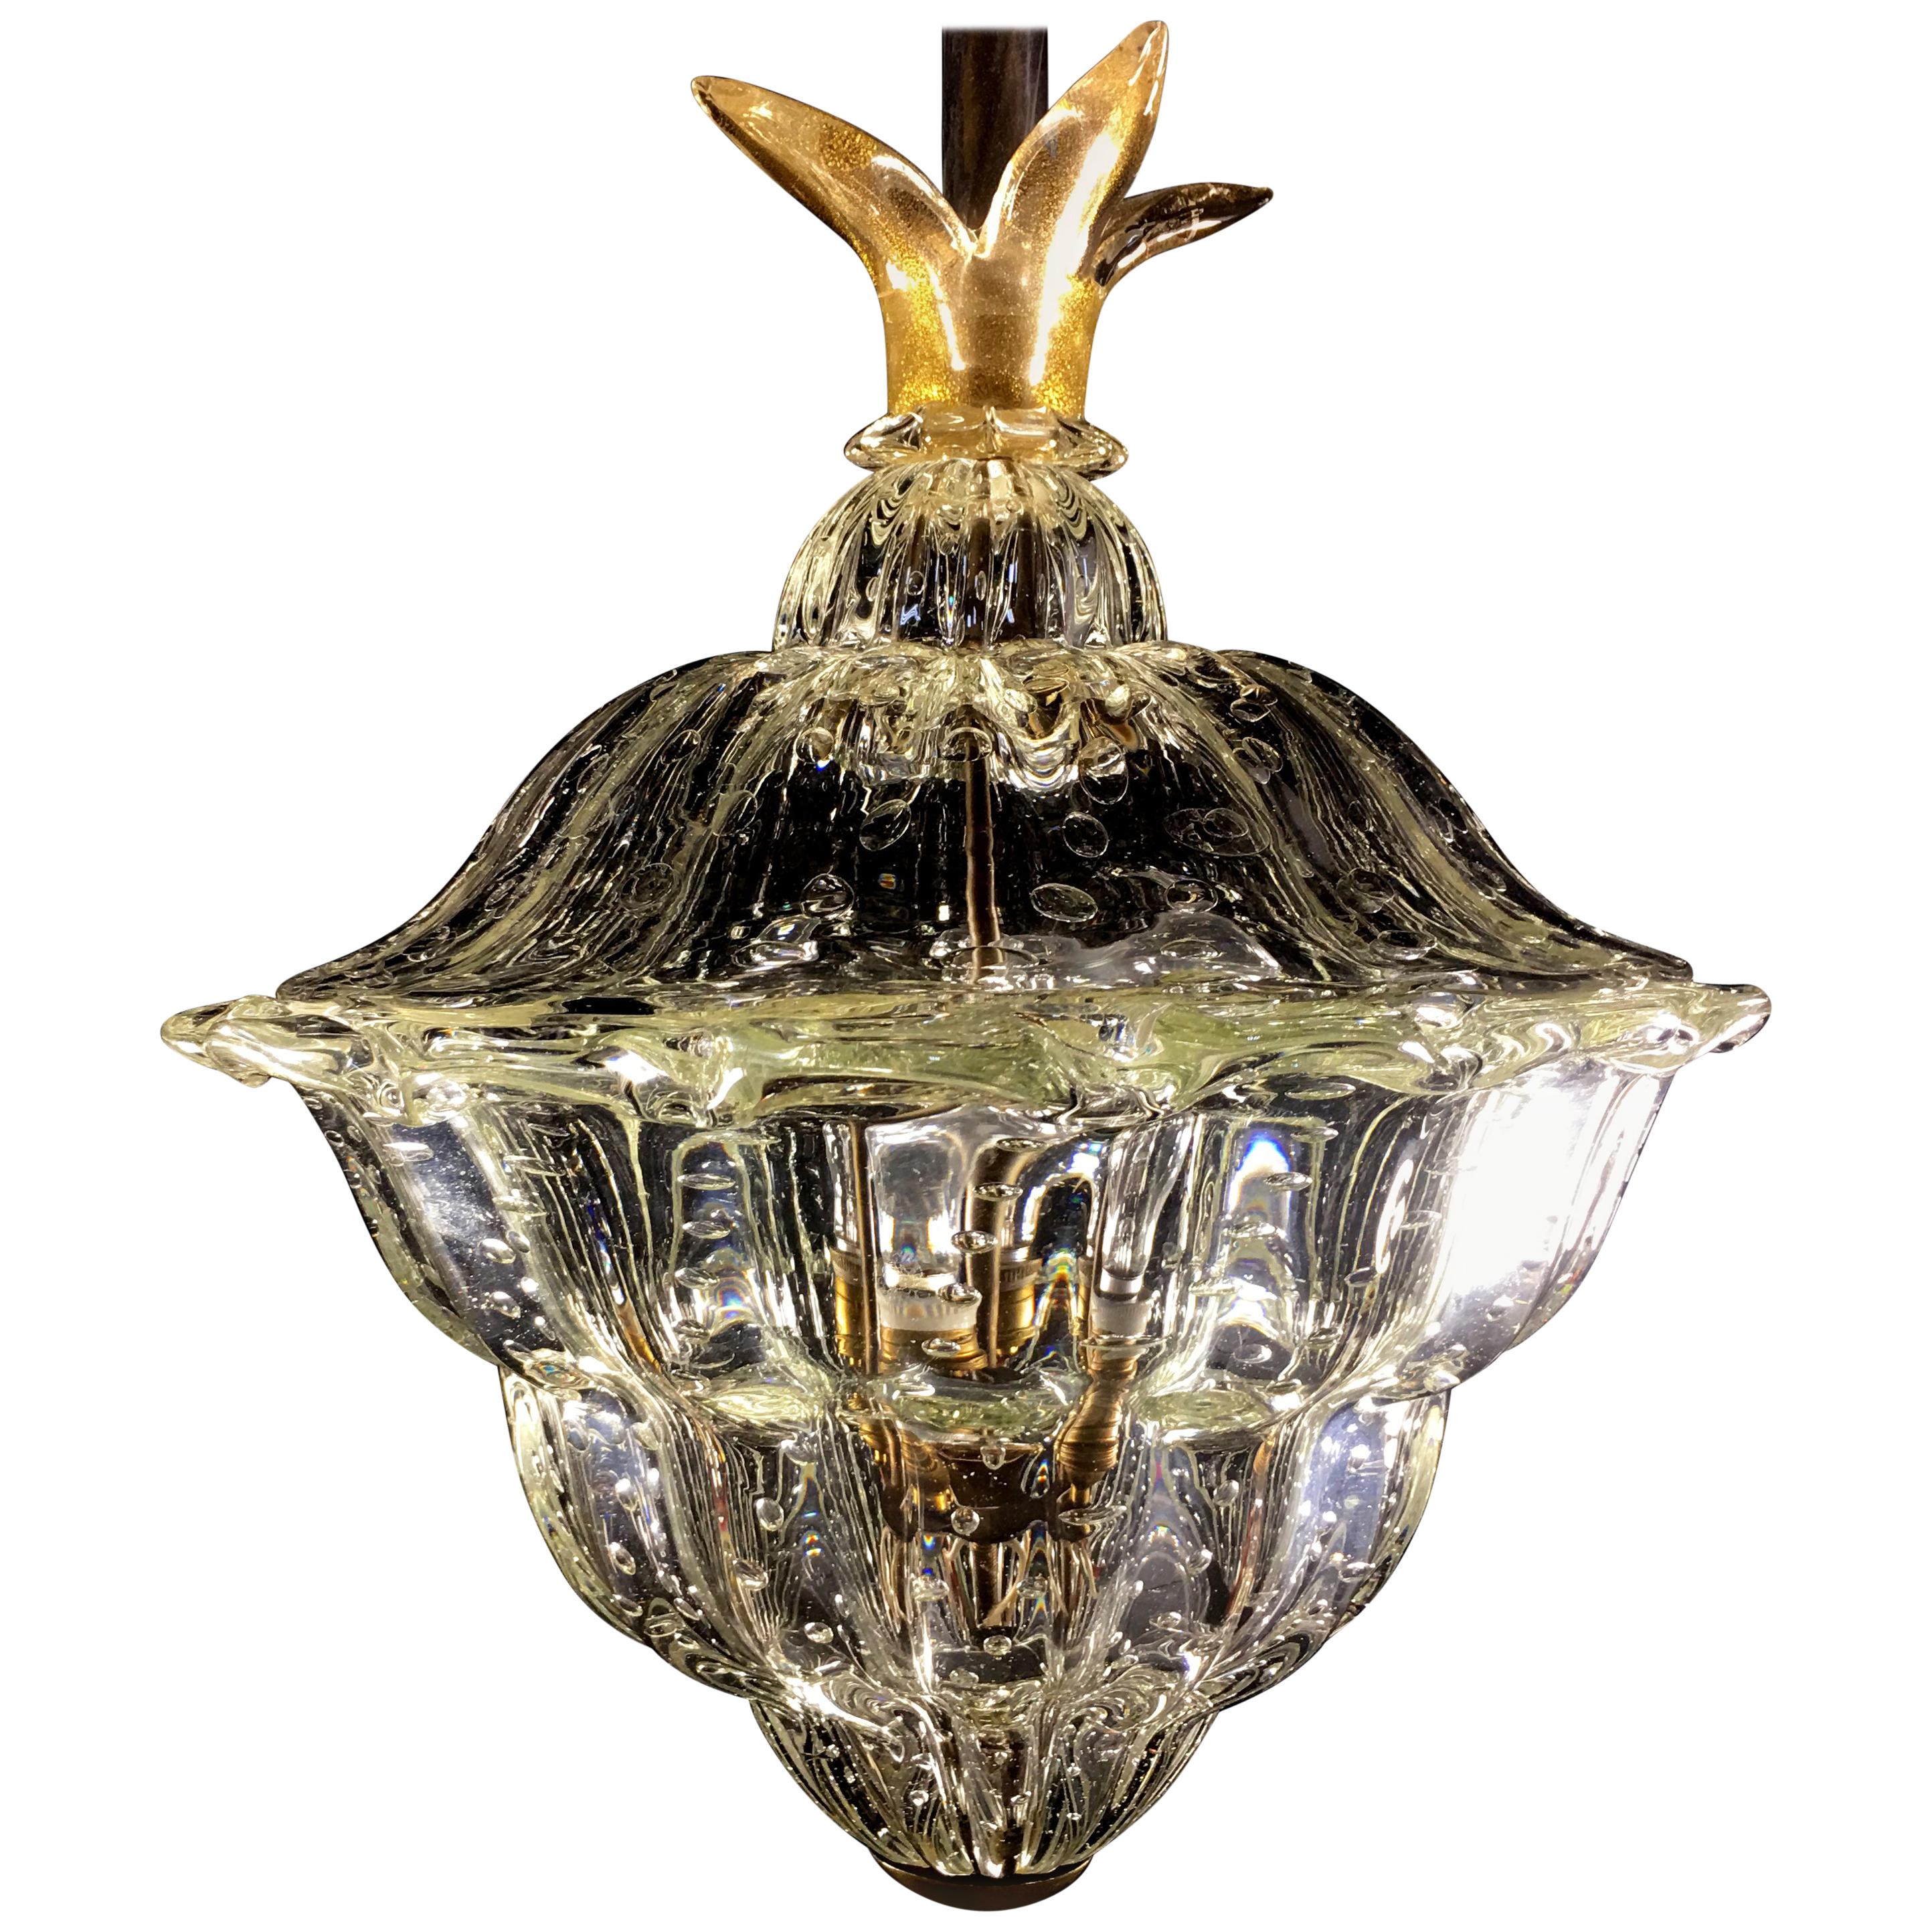 Chandeliers "The King", Gold Inclusion by Barovier & Toso, Murano, 1940s For Sale